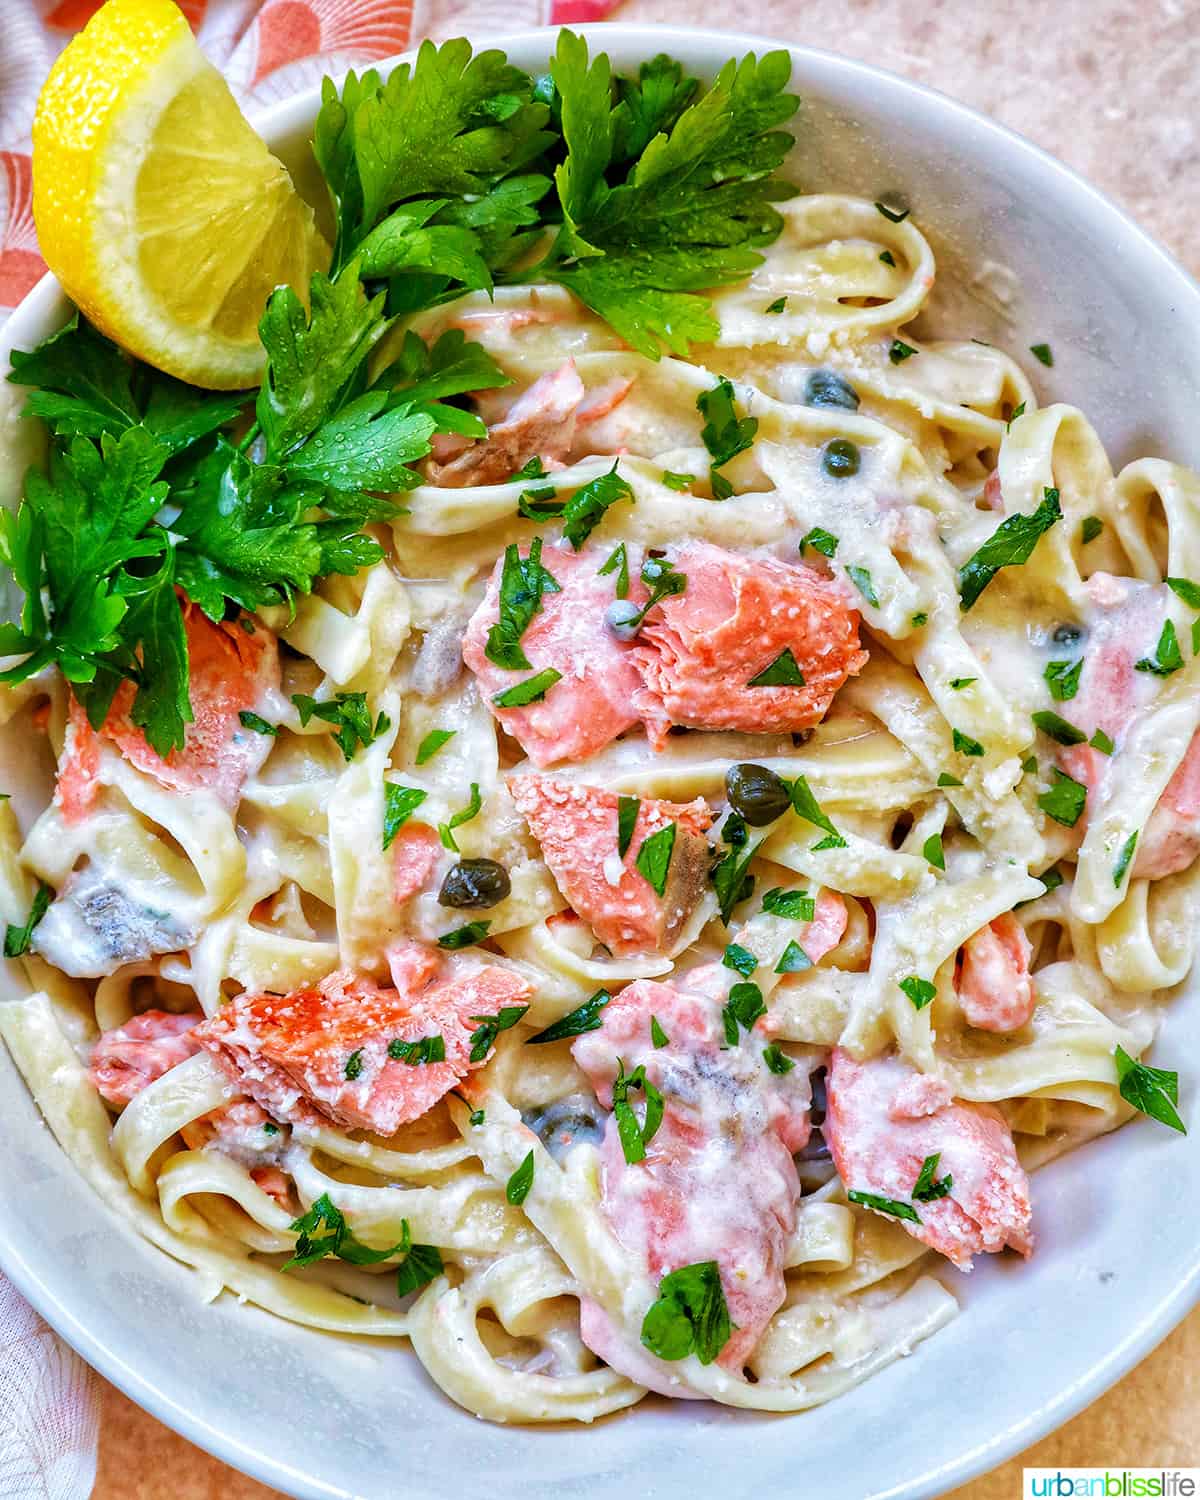 Pasta Alla Salmone with garnishes of lemon and parsley in a white bowl.